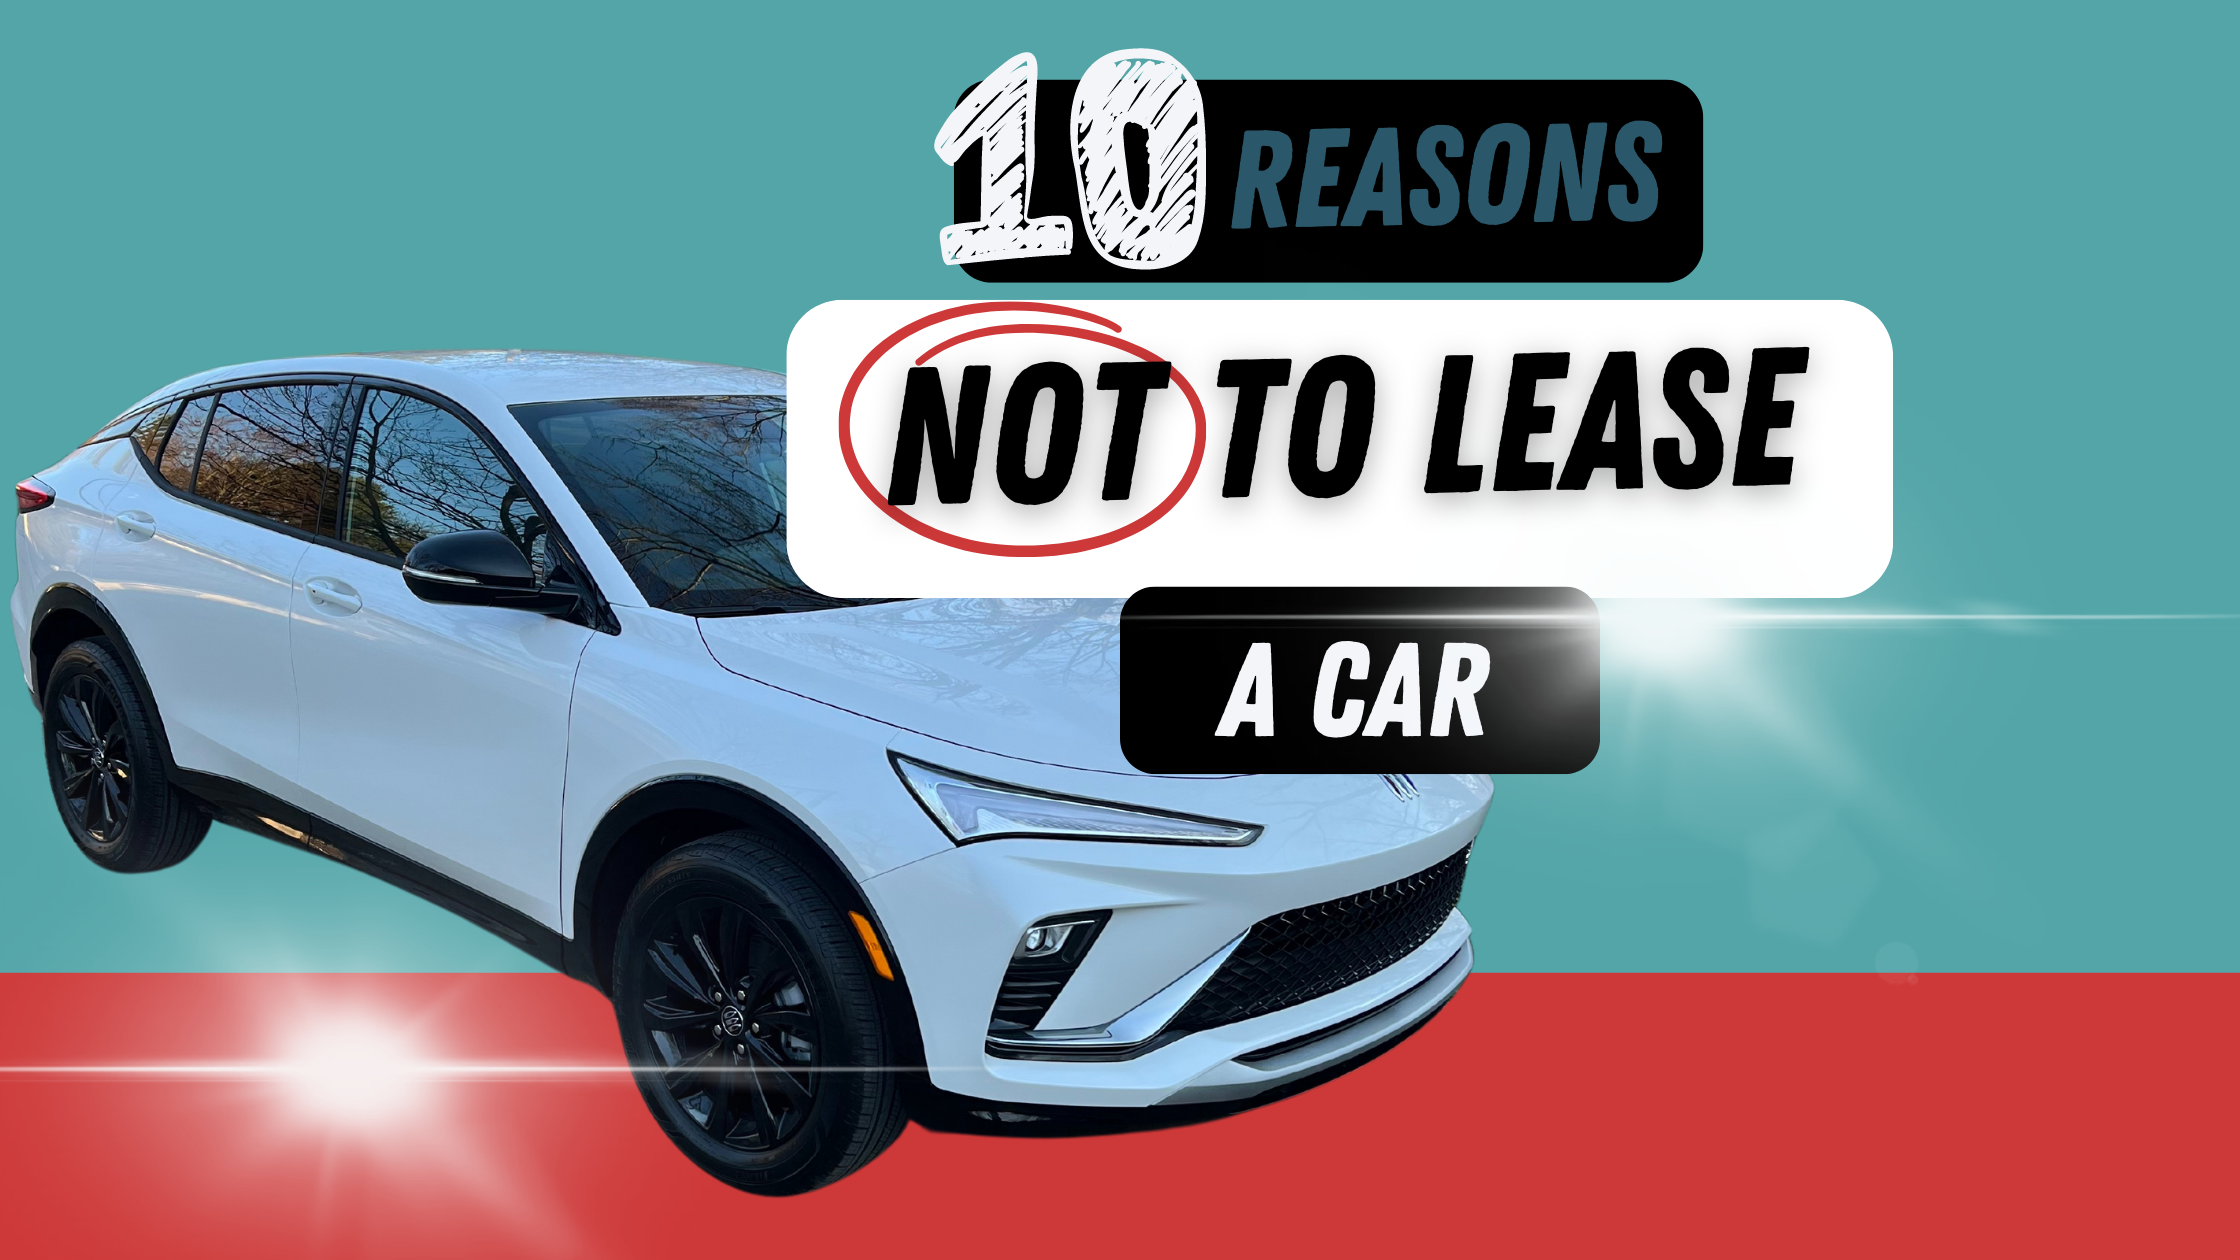 10 reasons not to lease a car